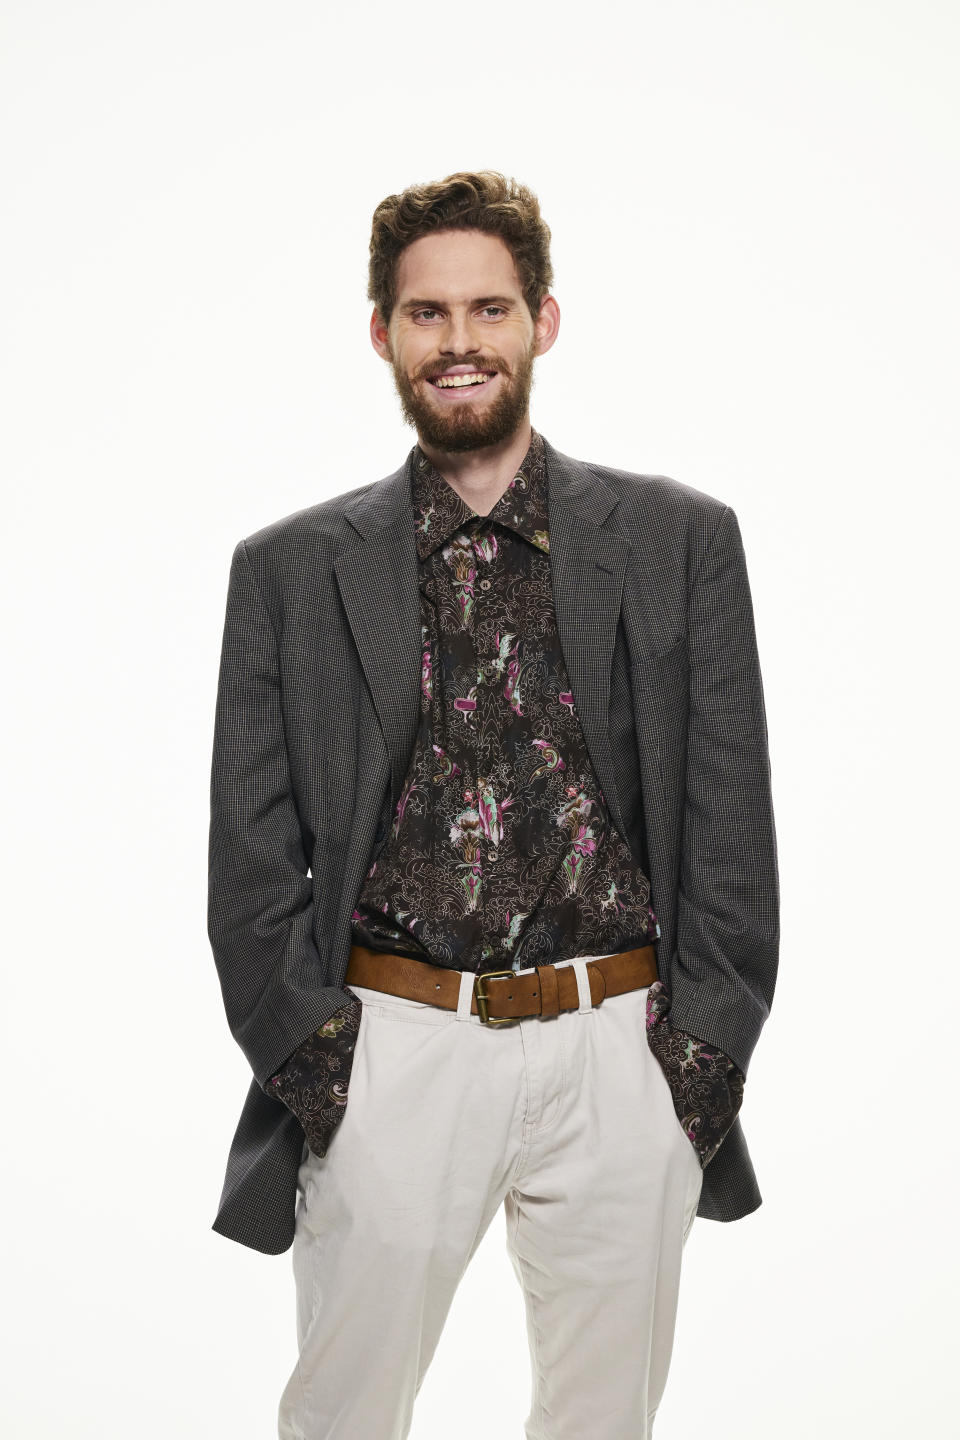 A tall bearded man stands in a dark patterned jacket over a dark shirt with pink patterns, white trousers and tan belt.